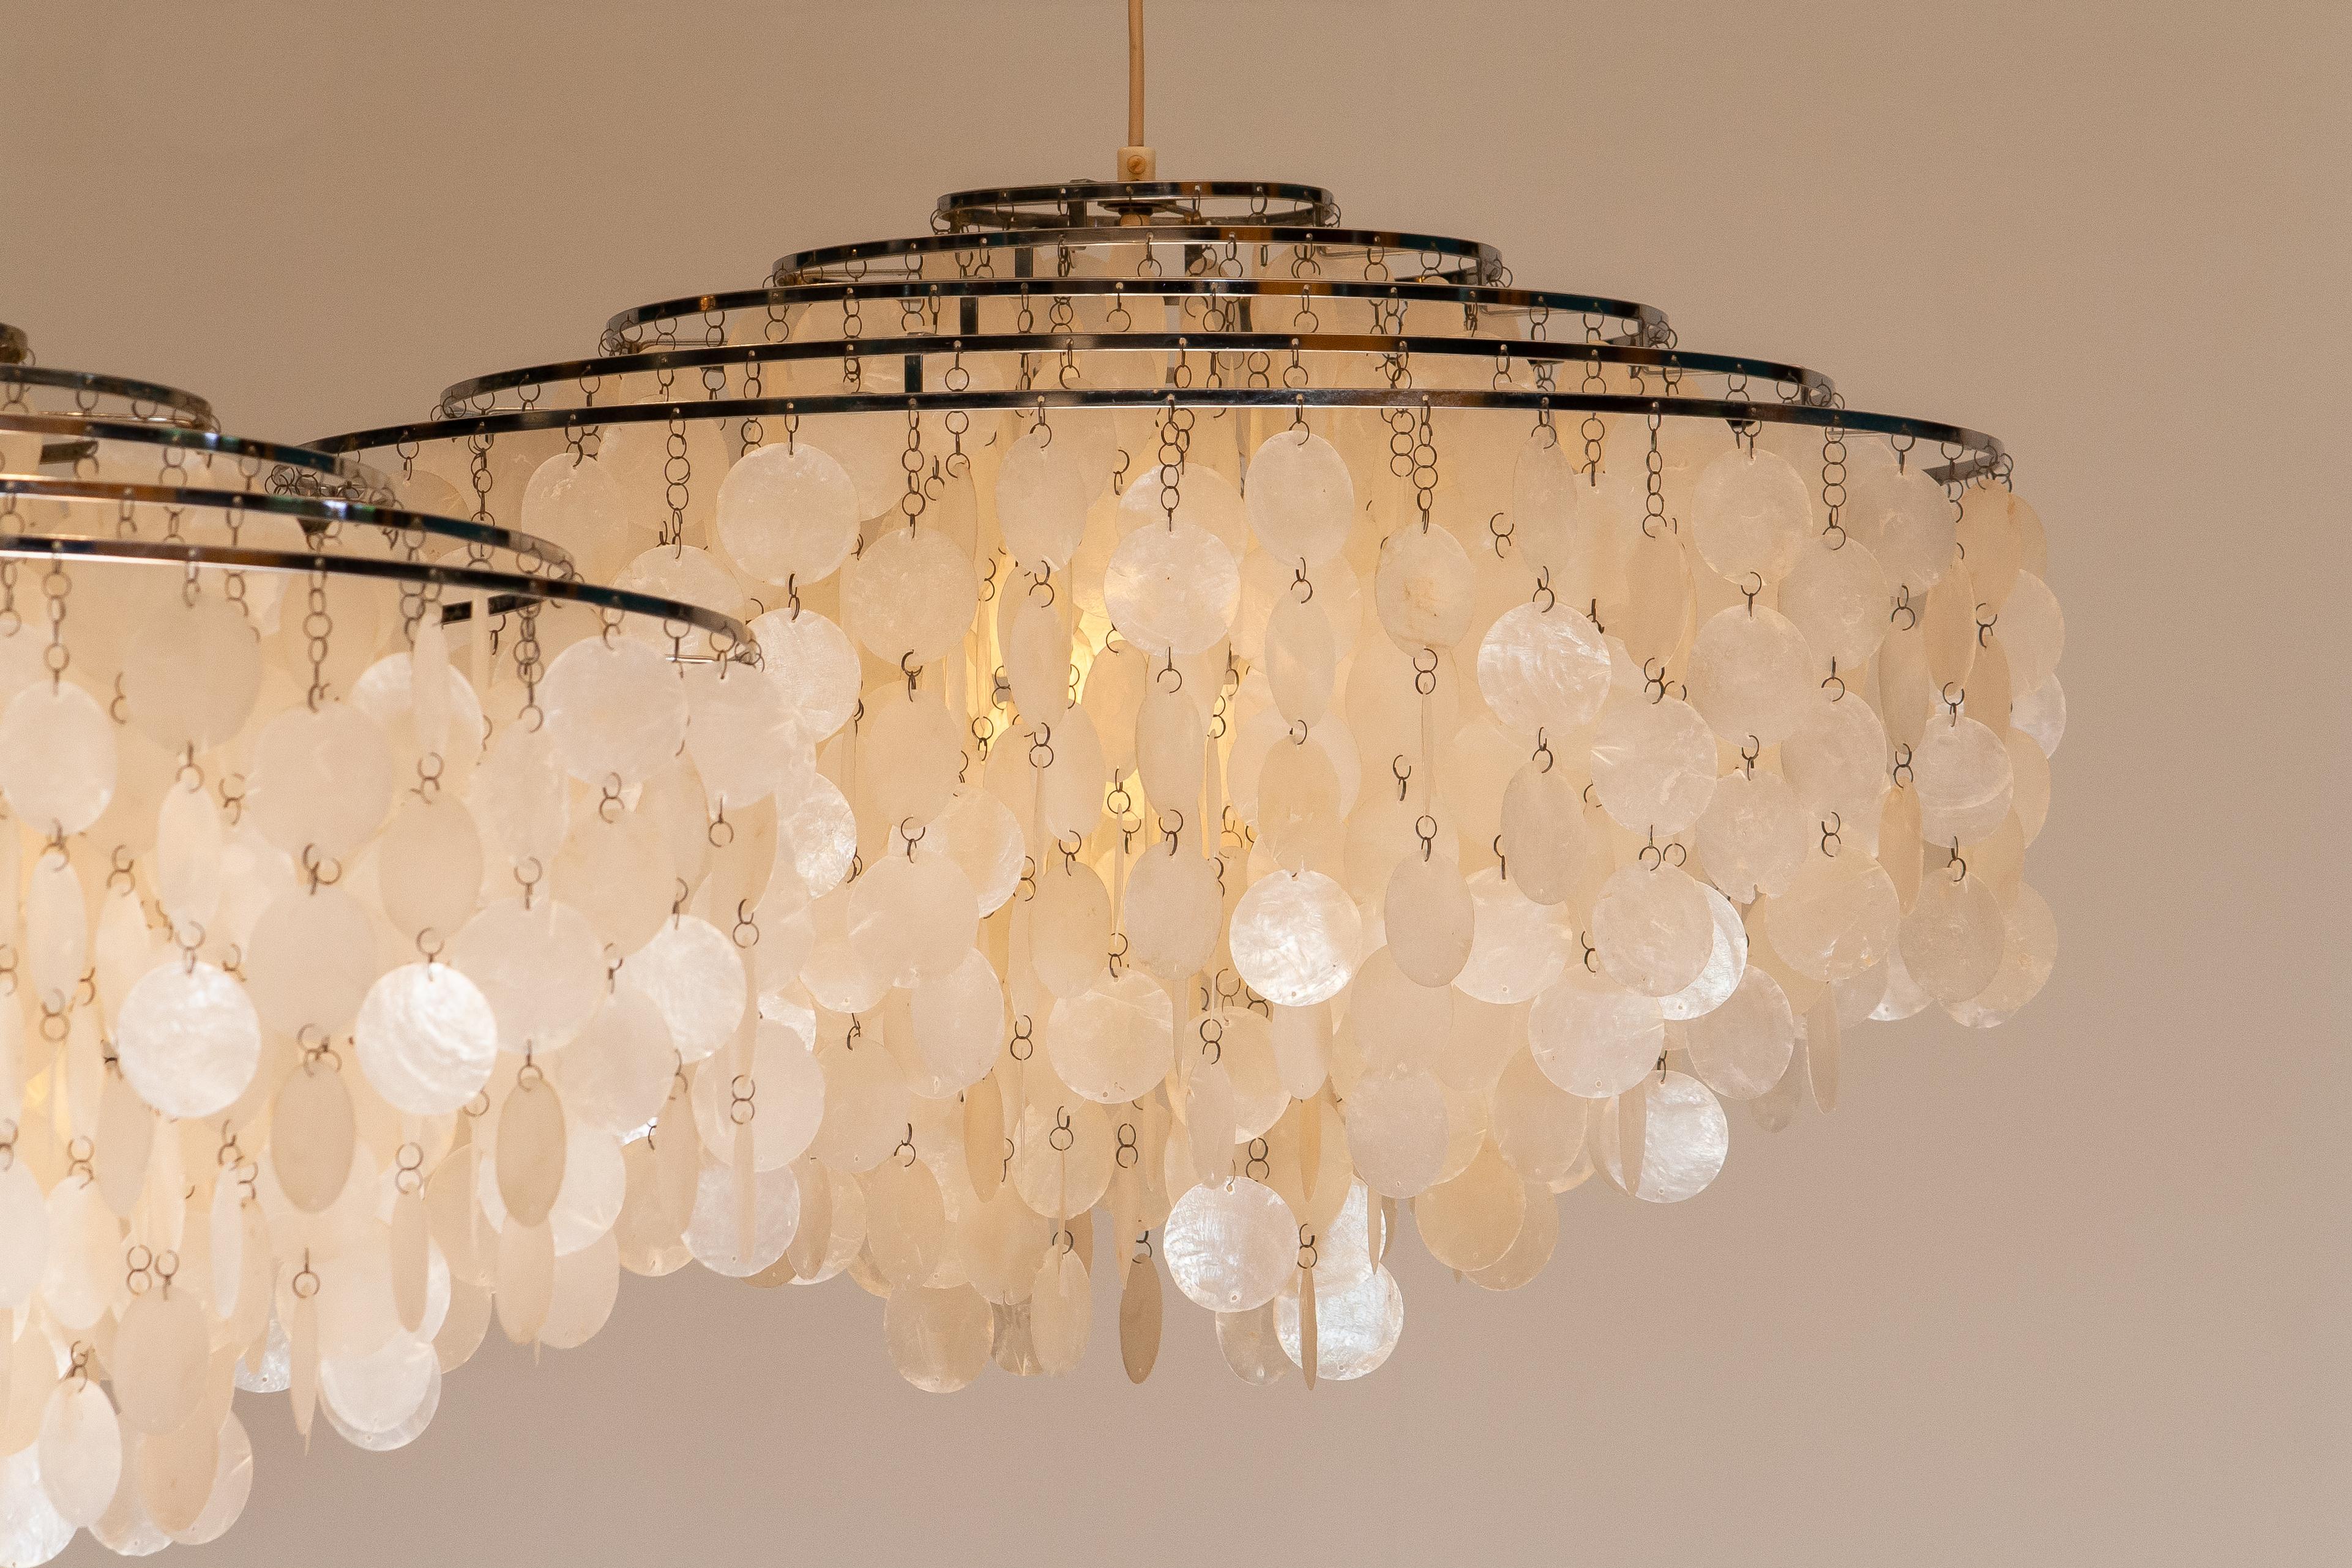 Mid-20th Century Pair of Extra Large Capiz Shell Chandeliers by Verner Panton for Luber AG. Swiss